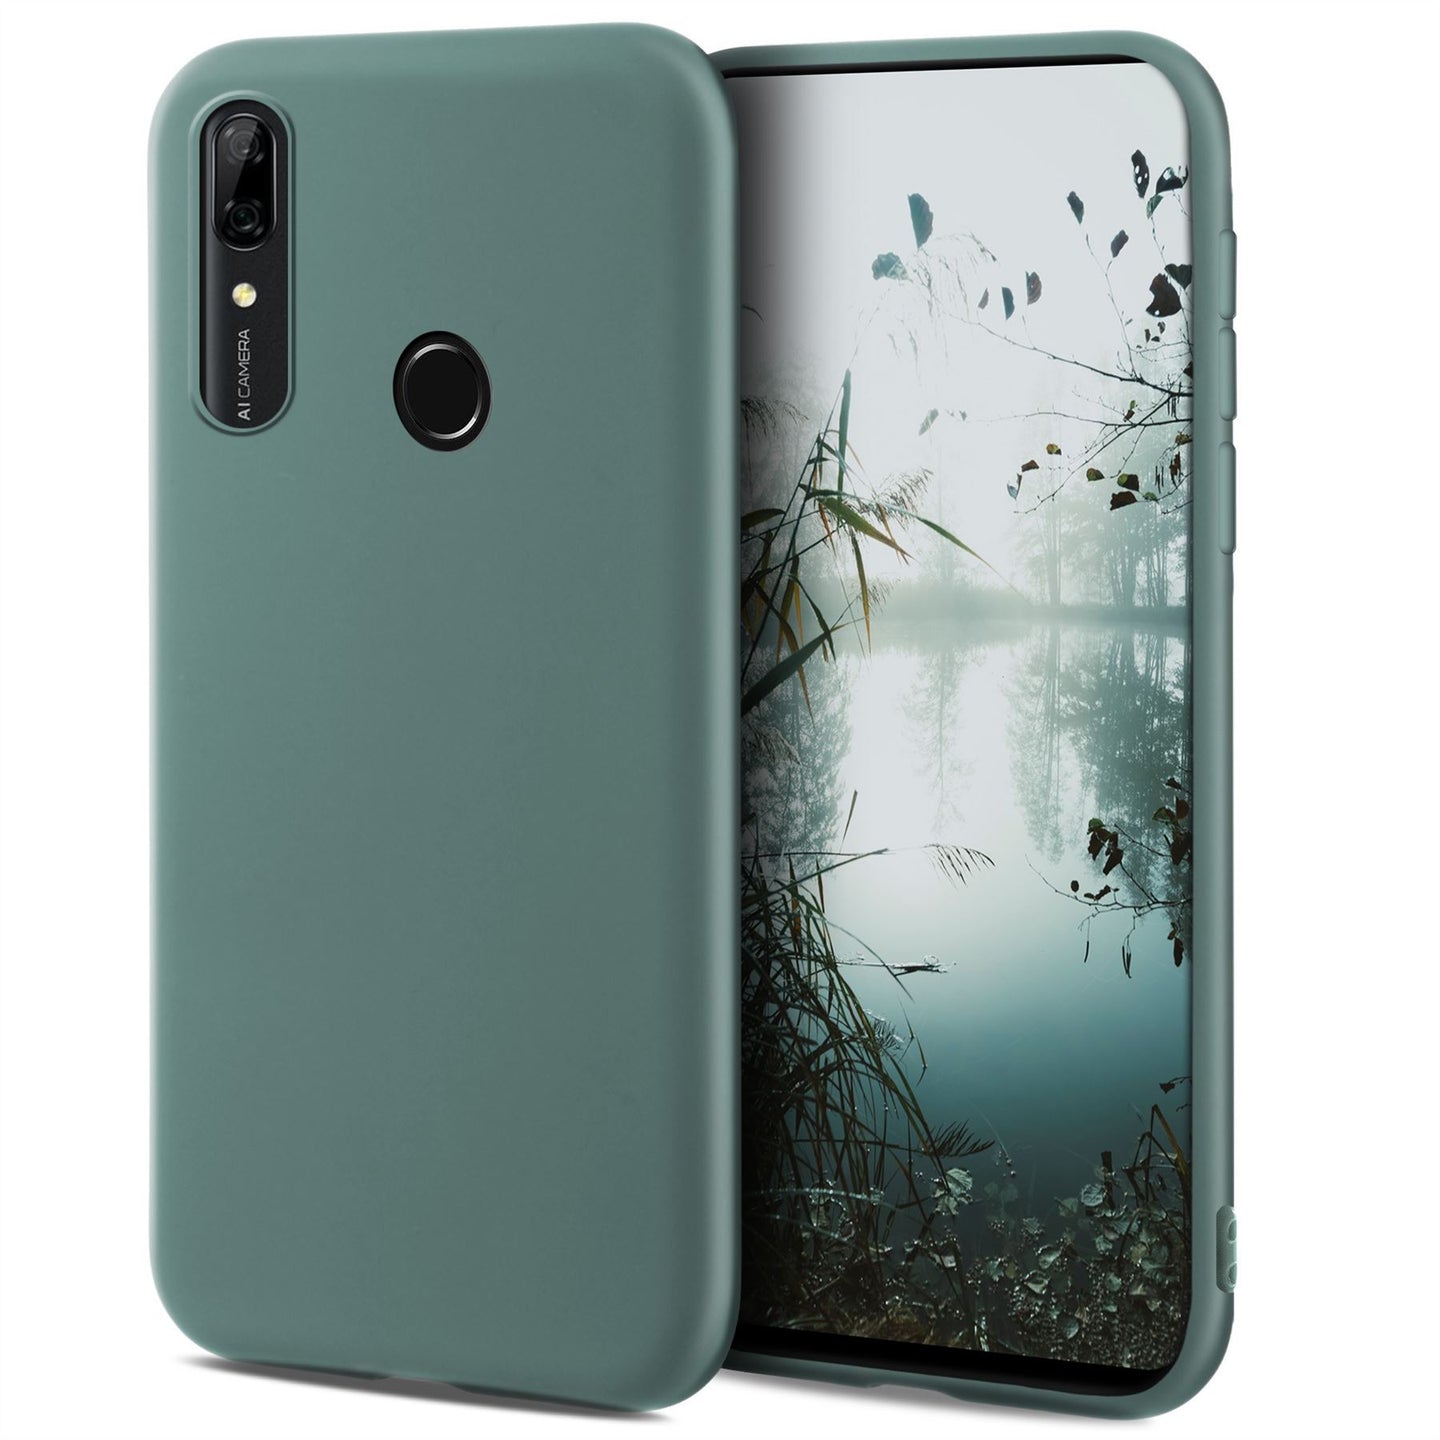 Moozy Minimalist Series Silicone Case for Huawei P Smart Z and Honor 9X, Blue Grey - Matte Finish Slim Soft TPU Cover